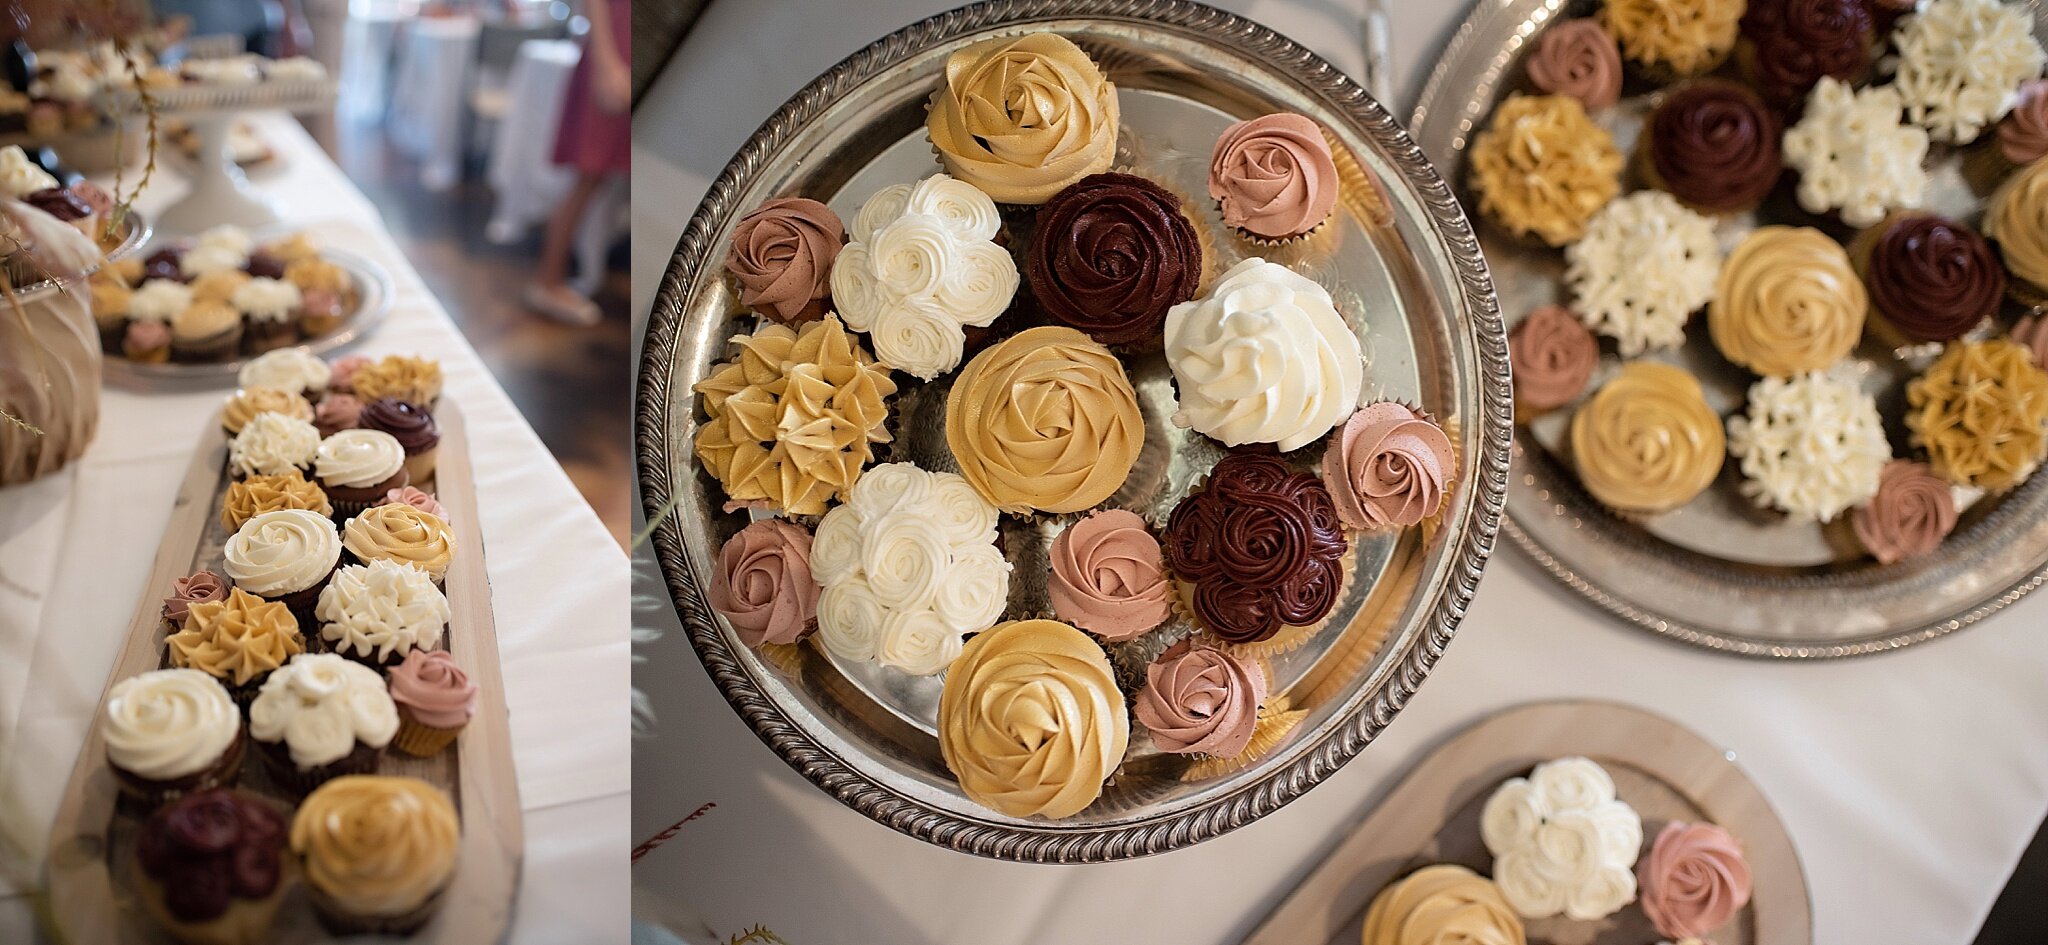 homemade cupcakes for wedding day chocolate and gold frosting